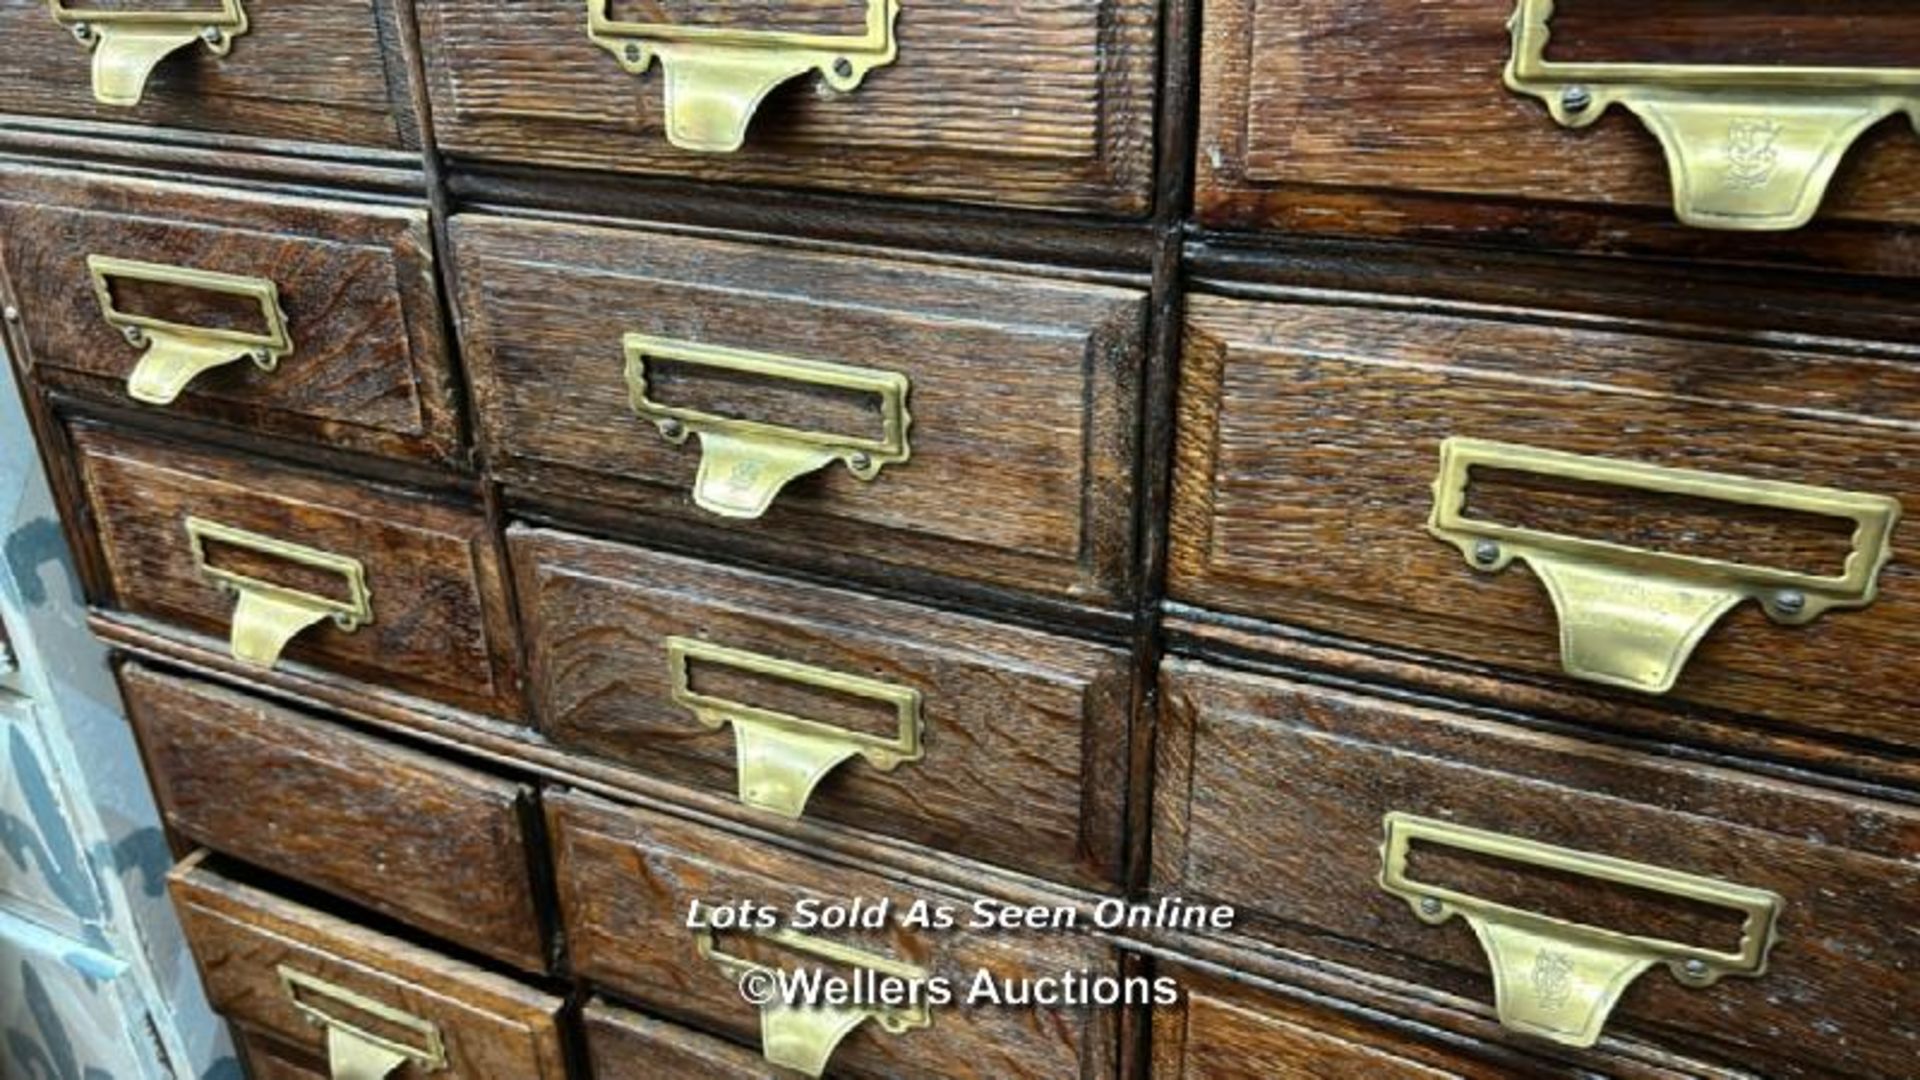 LATE 19TH CENTURY FILING CABINET, 27 DRAWERS, SHOWS WITH MISSING HANDLE, THE HANDLE IS PRESENT - Image 3 of 6